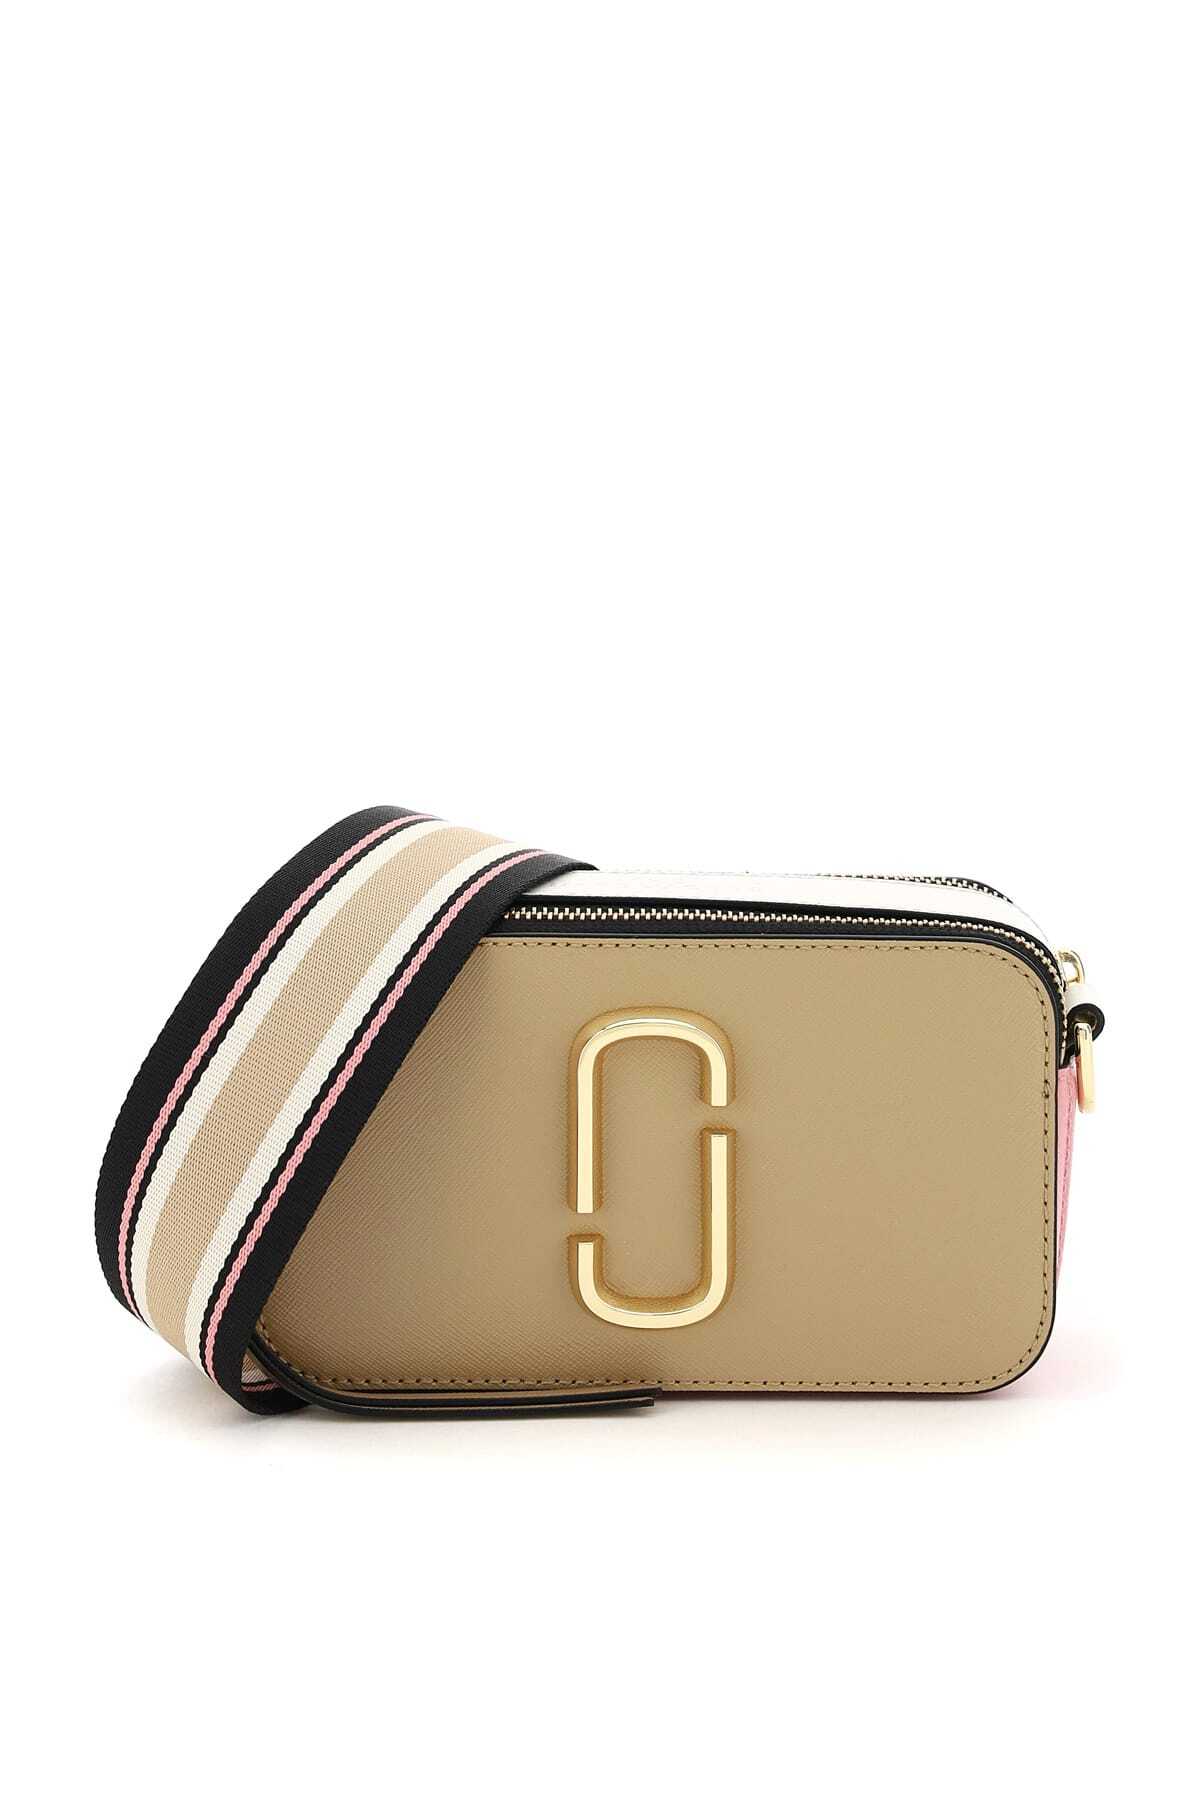 Marc Jacobs The Snapshot Small Camera Bag in multi